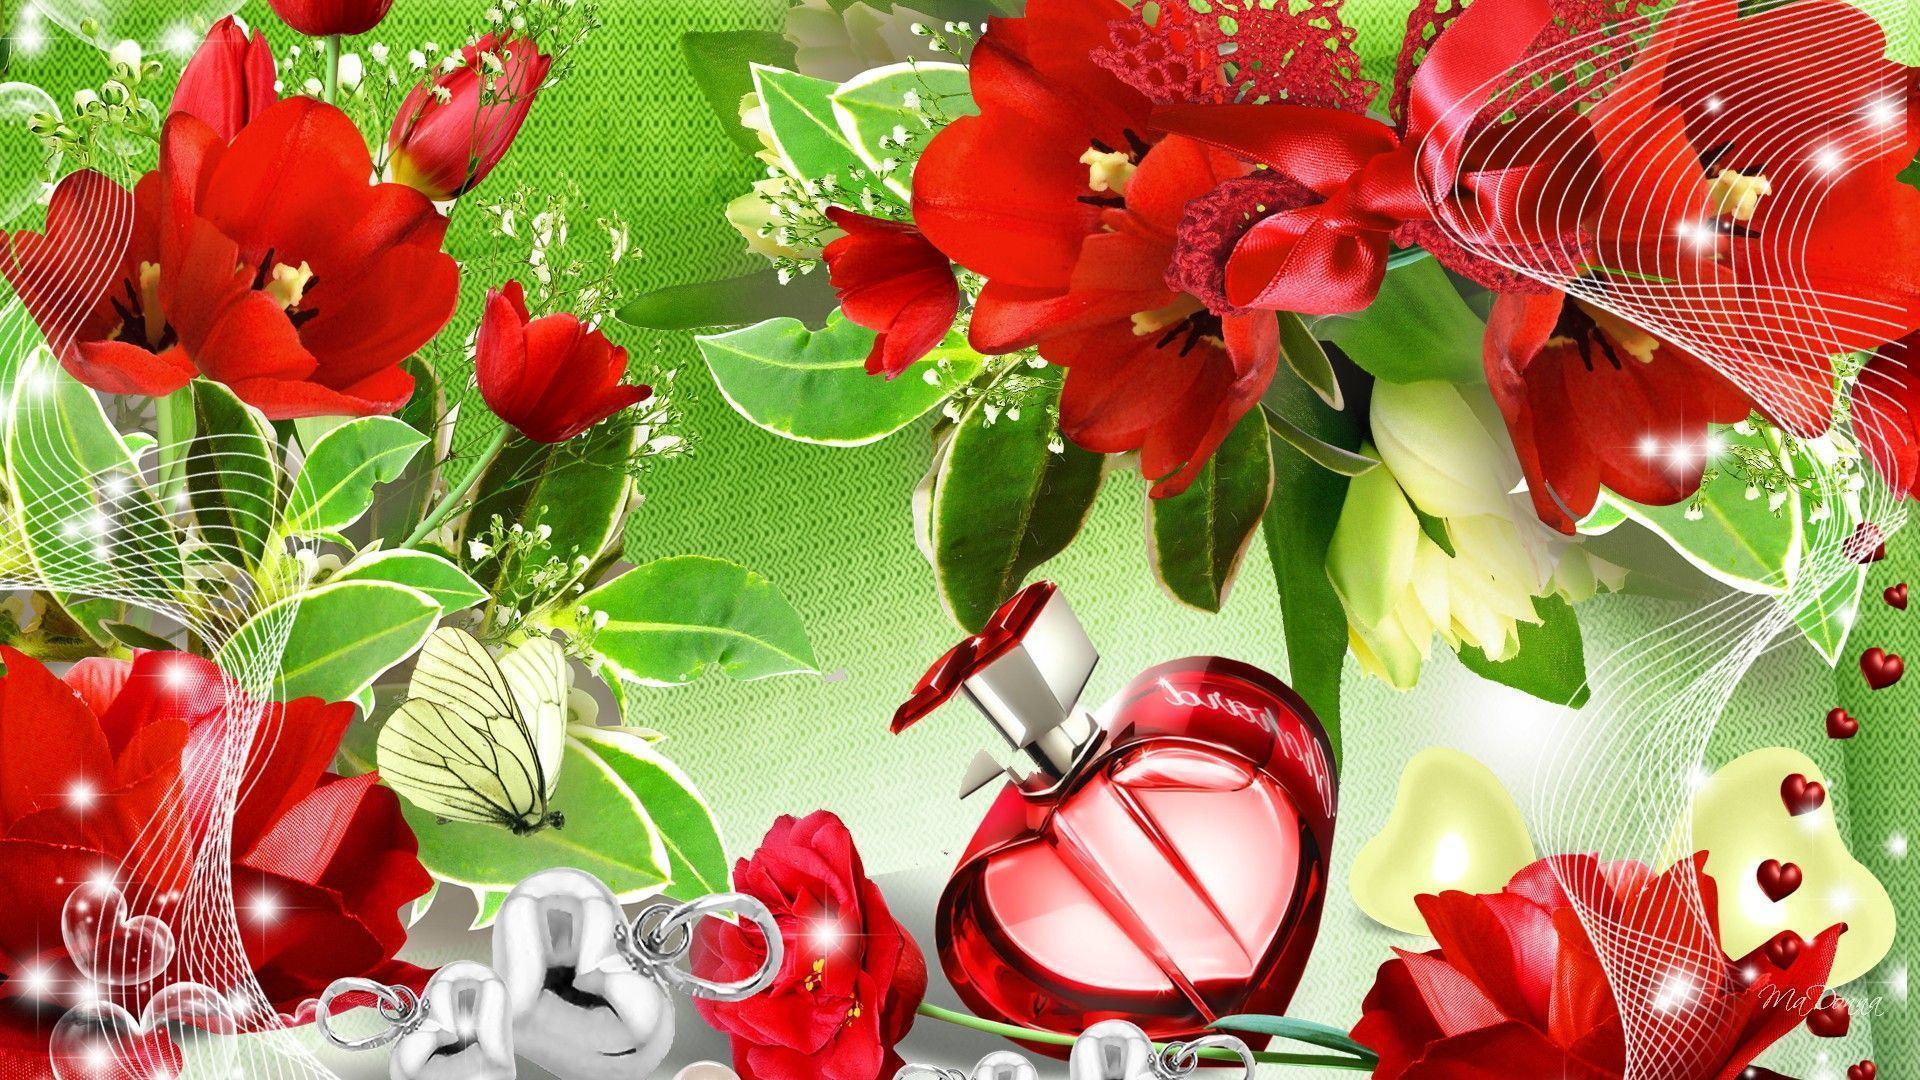 Flowers For > Beautiful Flowers And Butterflies Wallpaper